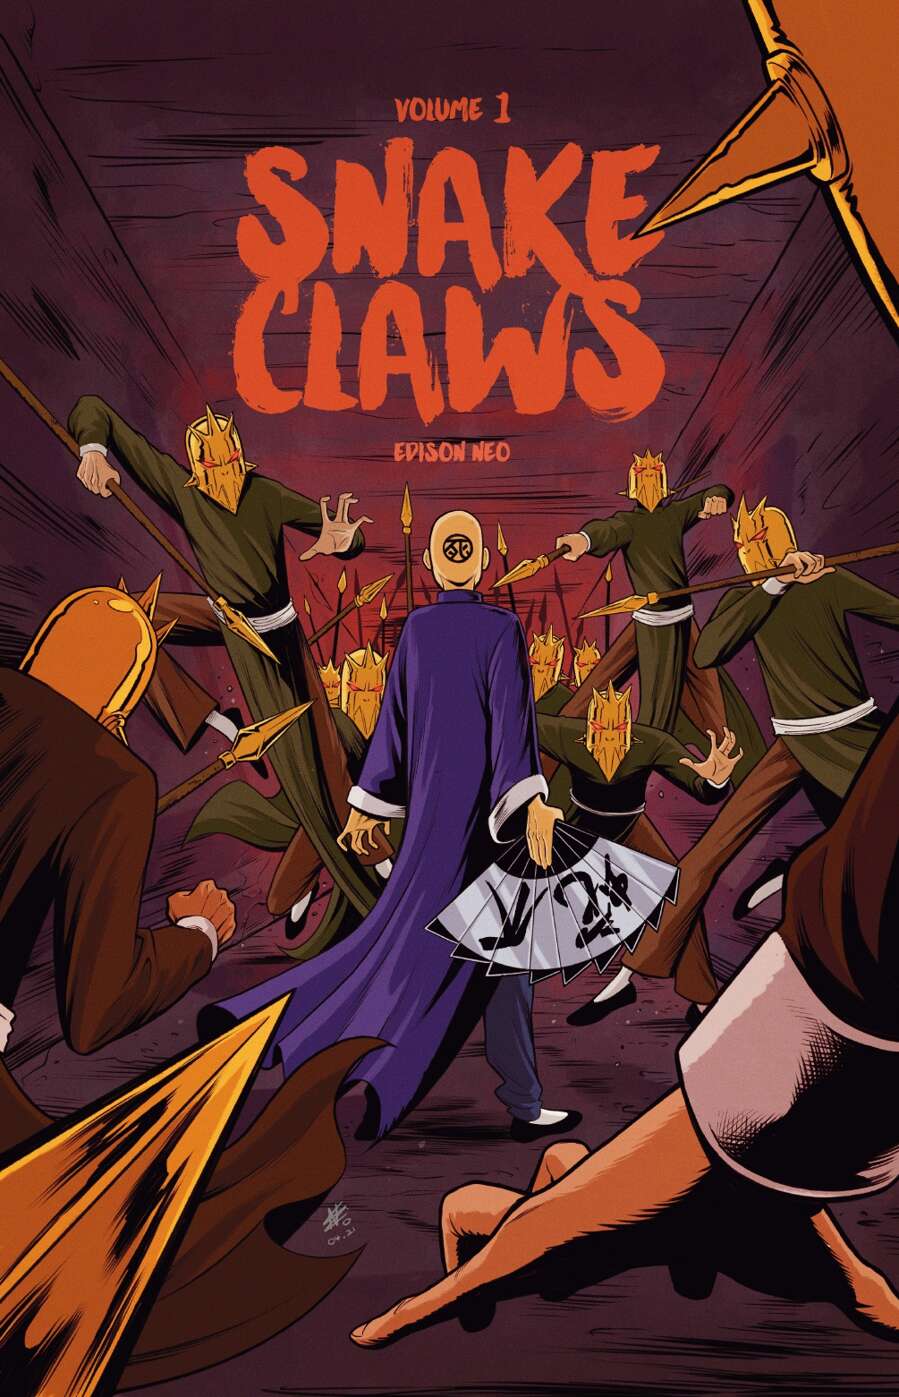 Snake Claws Volume 1